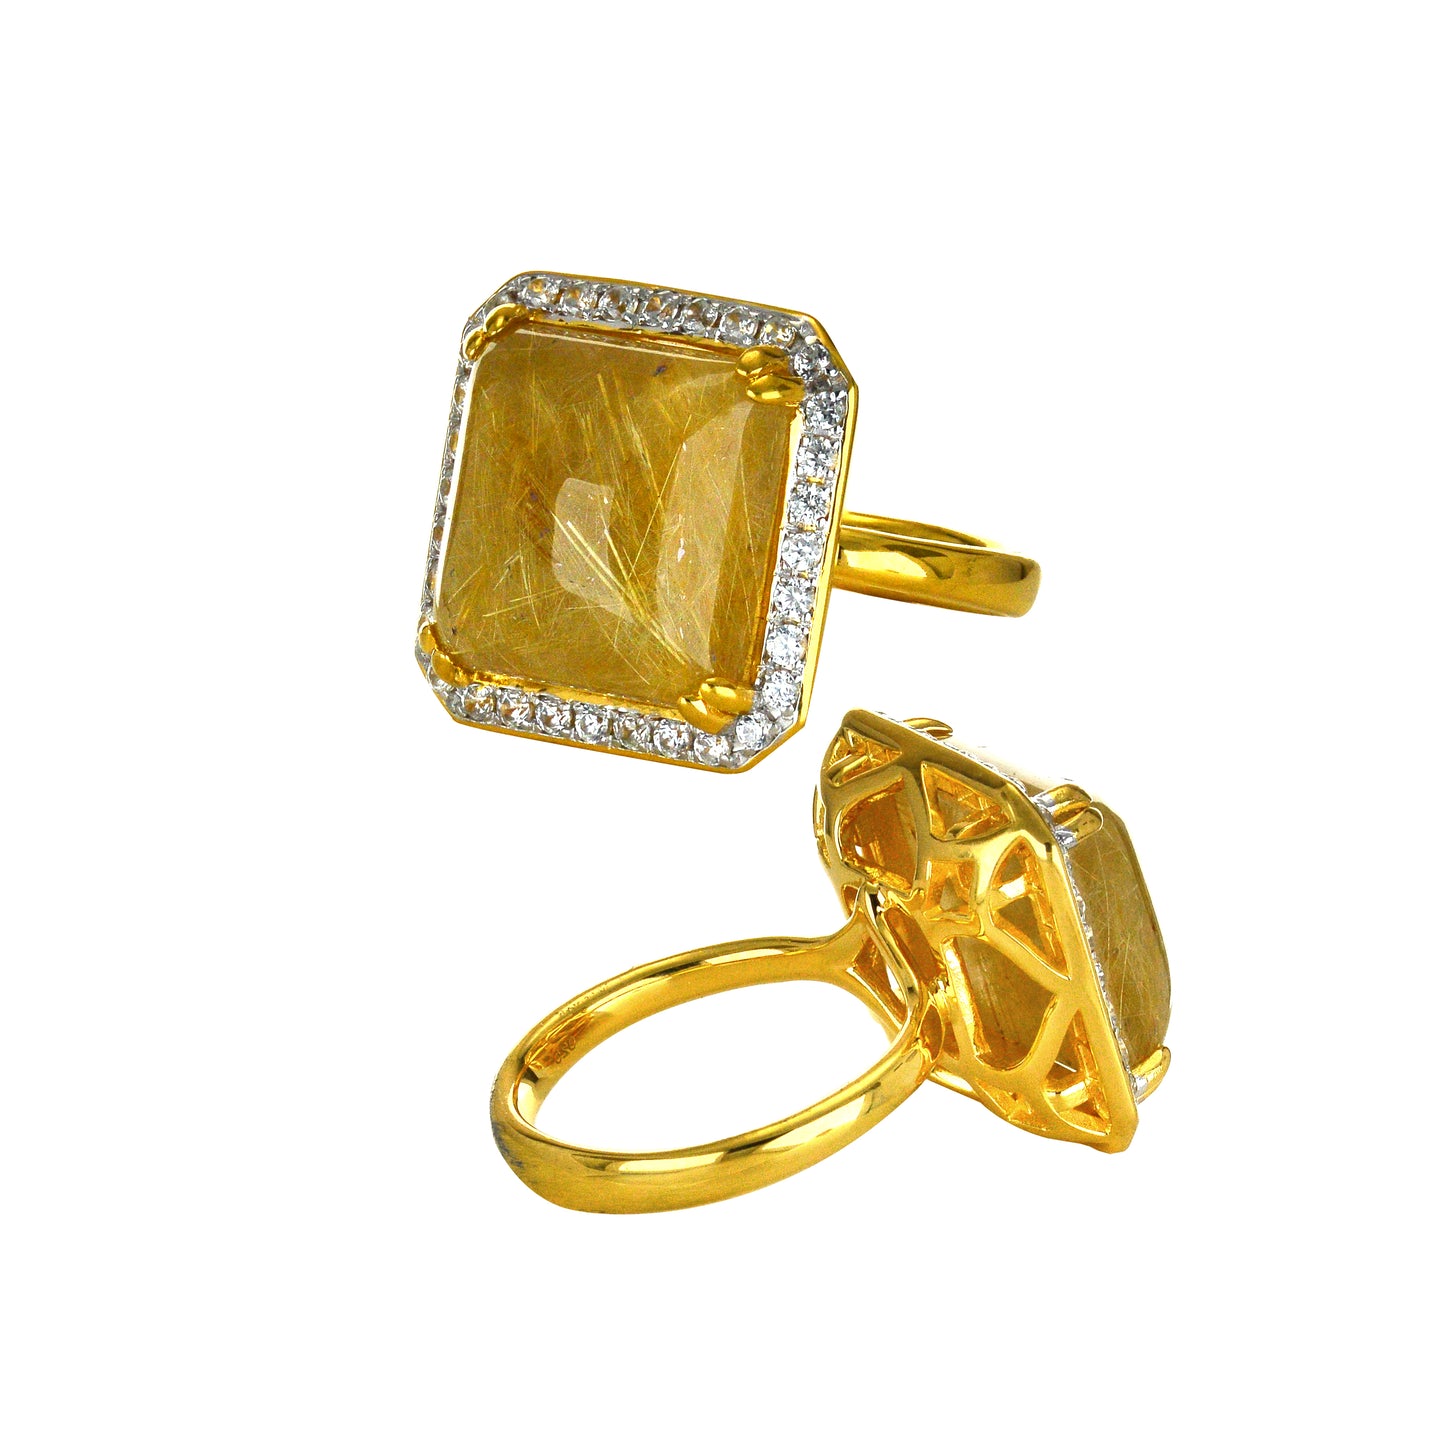 Stand out & Shine - Rutilated Quartz Ring